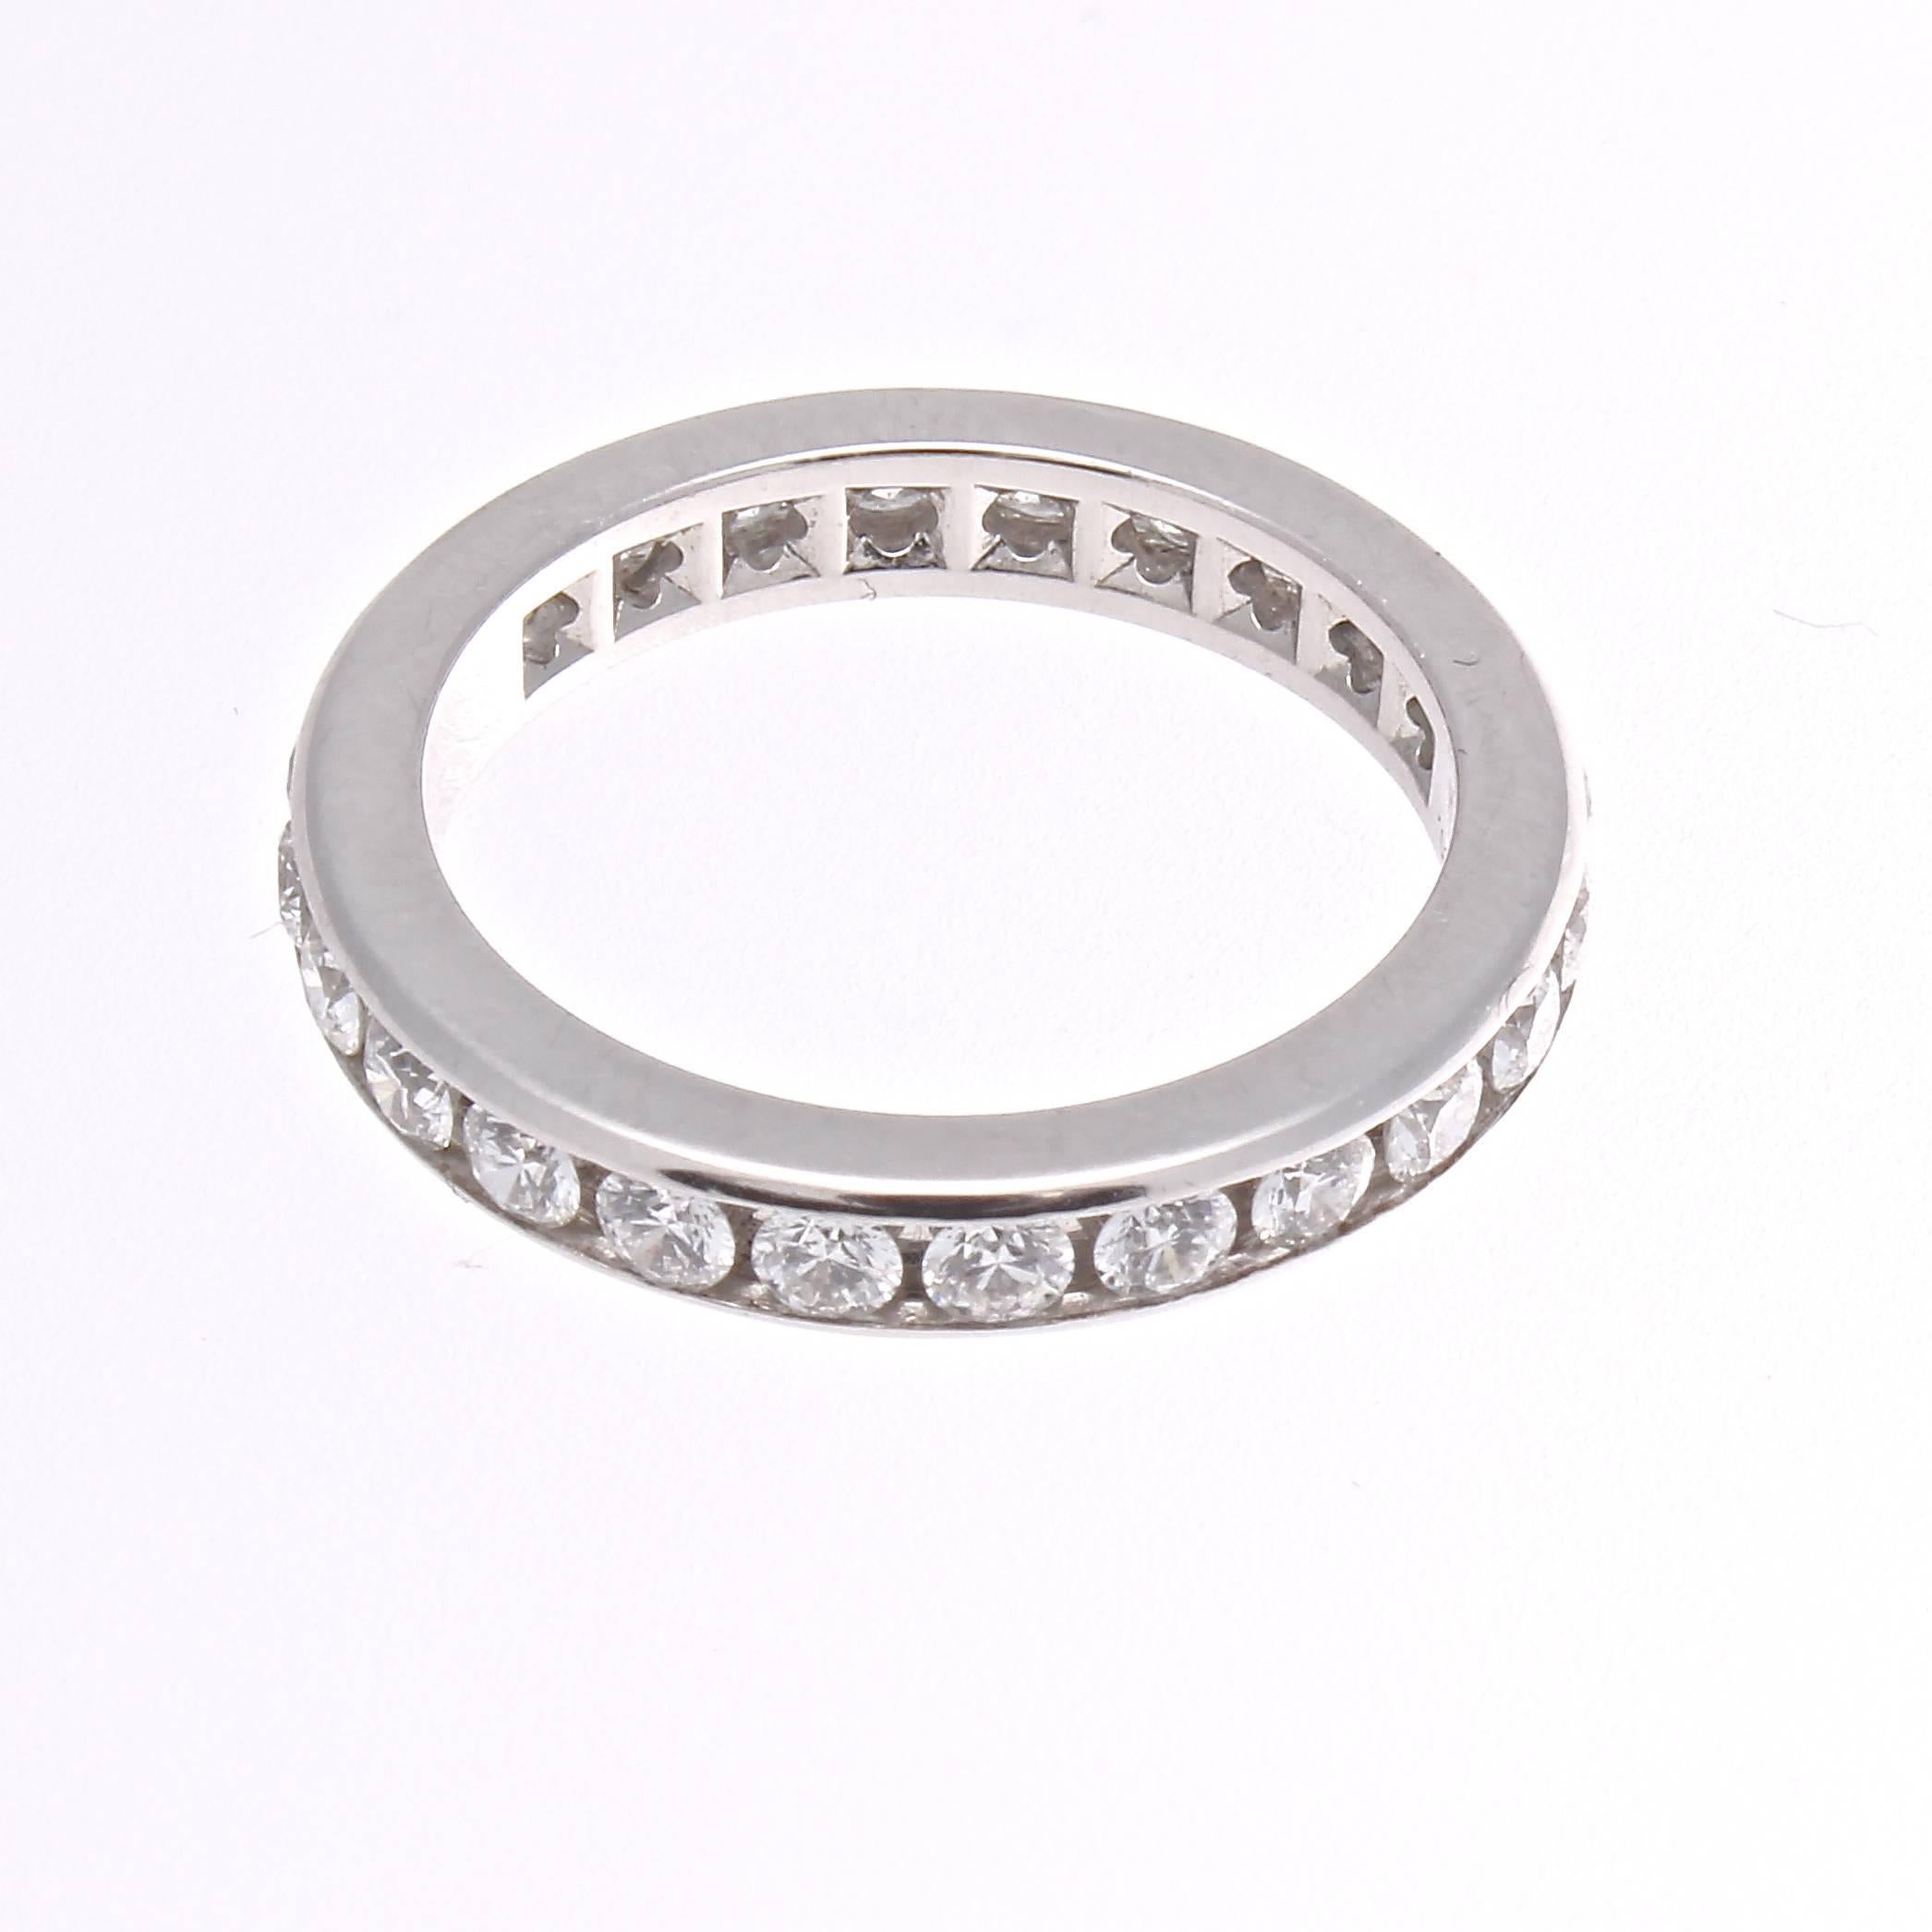 The refined taste of Tiffany is exemplified through this diamond eternity band. Featuring white, clean round cut diamonds are channel set in a platinum ring.

Ring size 4-1/2

Signed T&CO